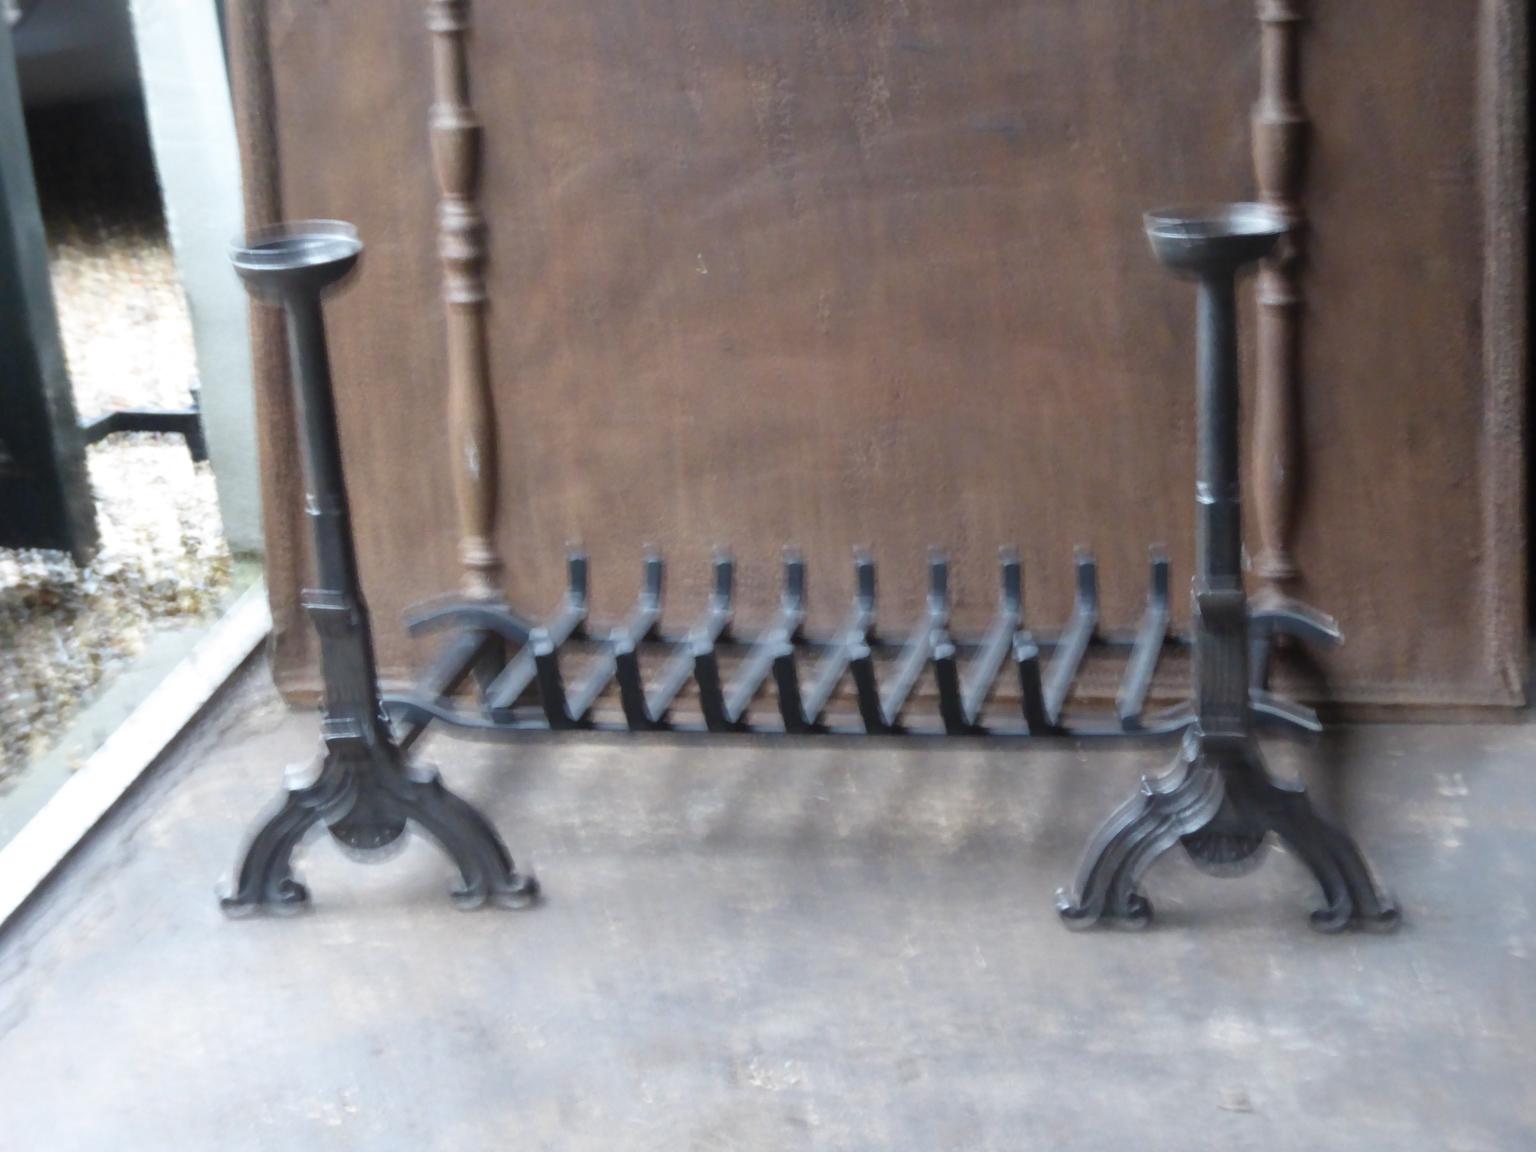 Gothic Revival English Neo Gothic Style Fireplace Grate, Fire Grate